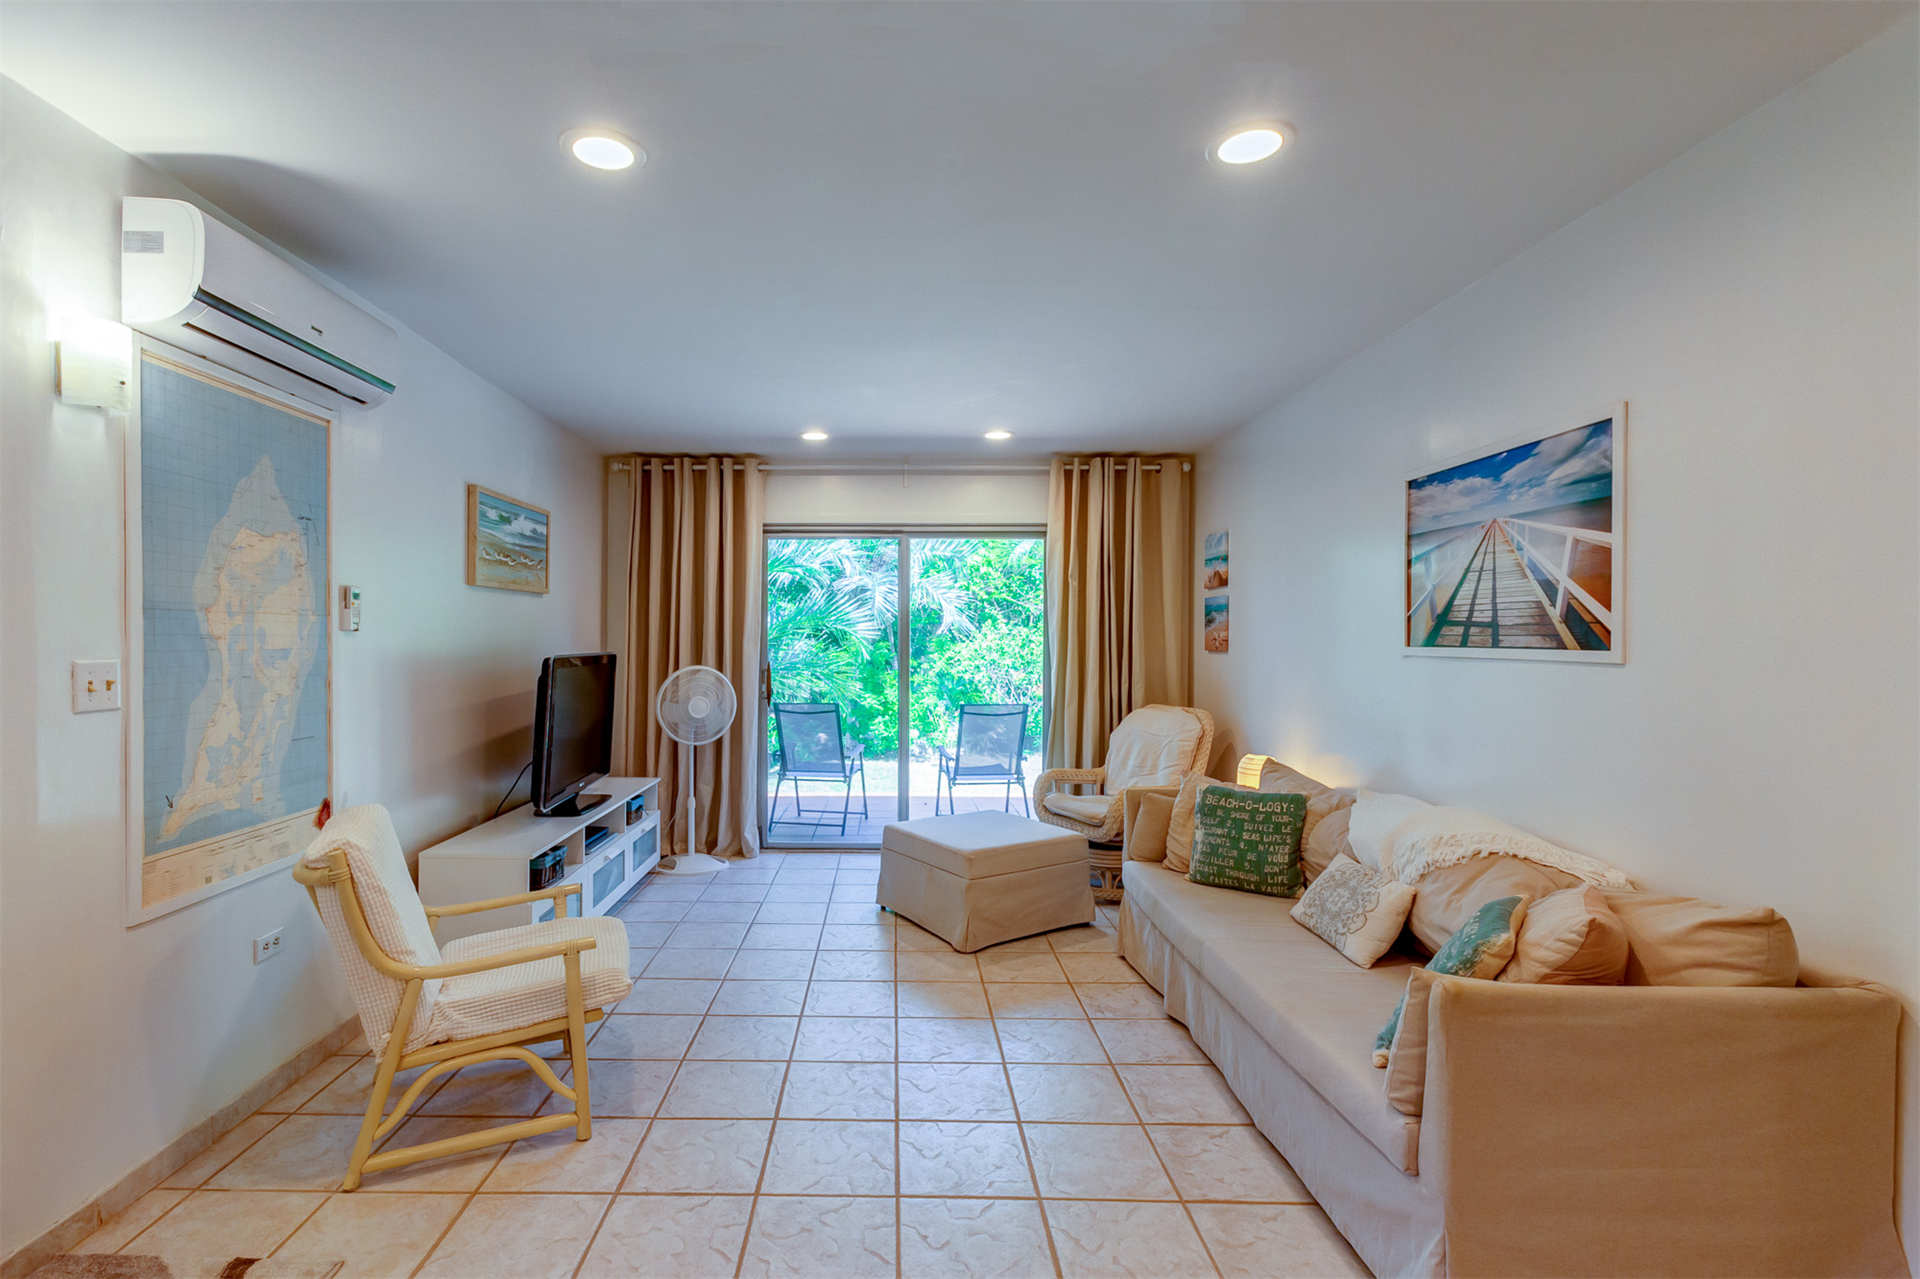 4. Condo - Ground Floor Unit for Sale at The Condos In Sandy Point Columbus Landings, San Salvador Bahamas